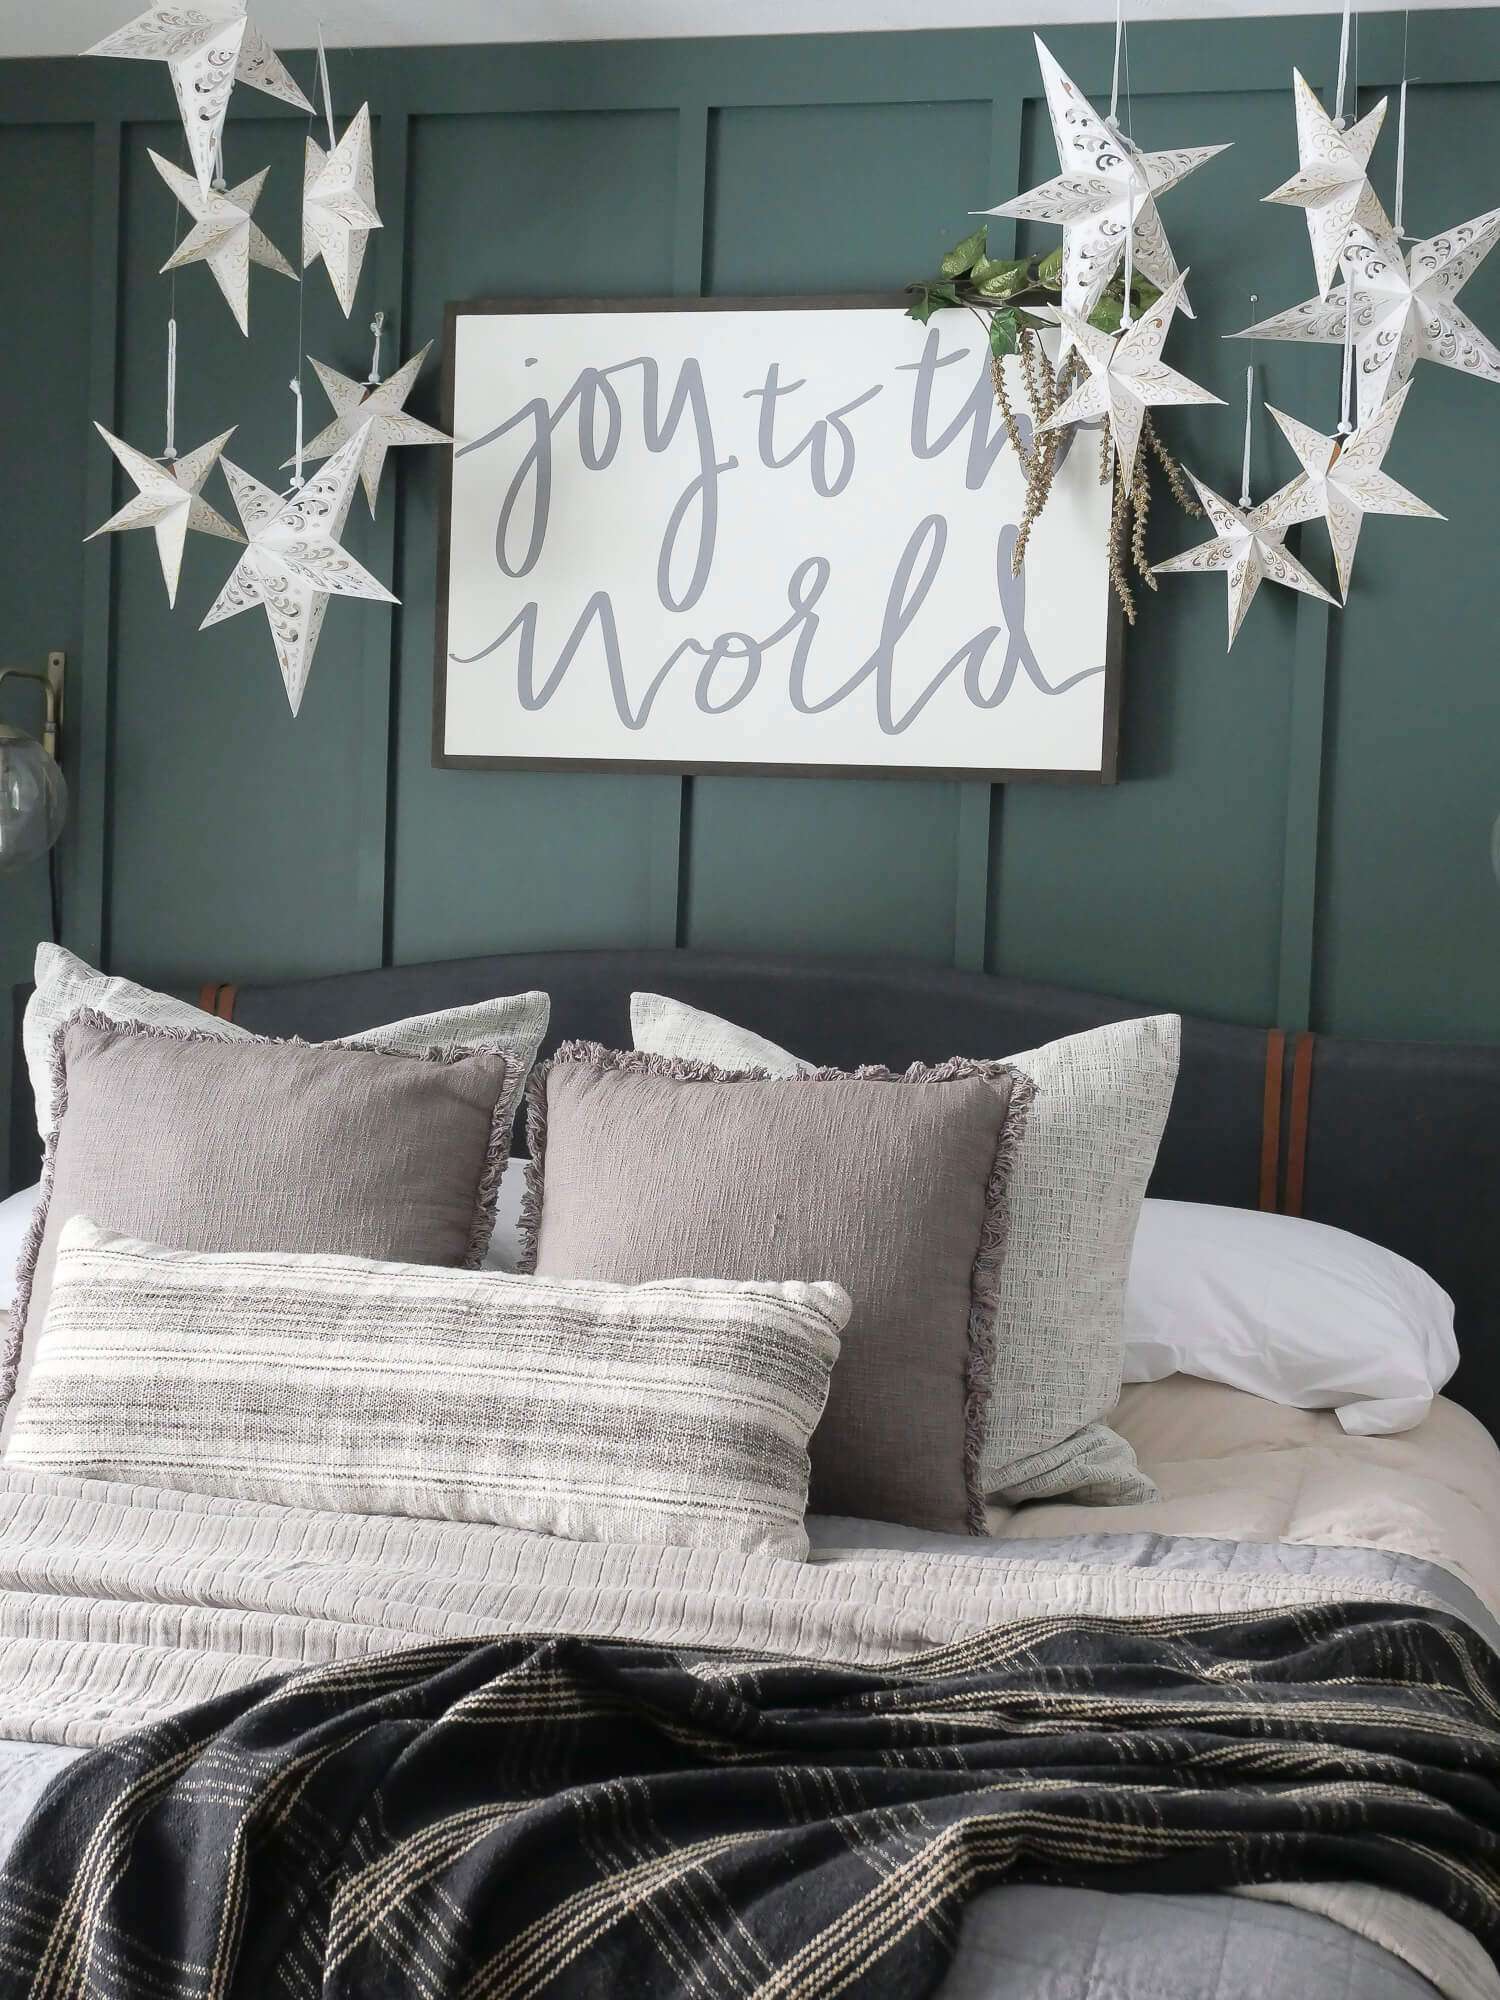 A piece of wall art hanging over a bed reading "Joy to the World"